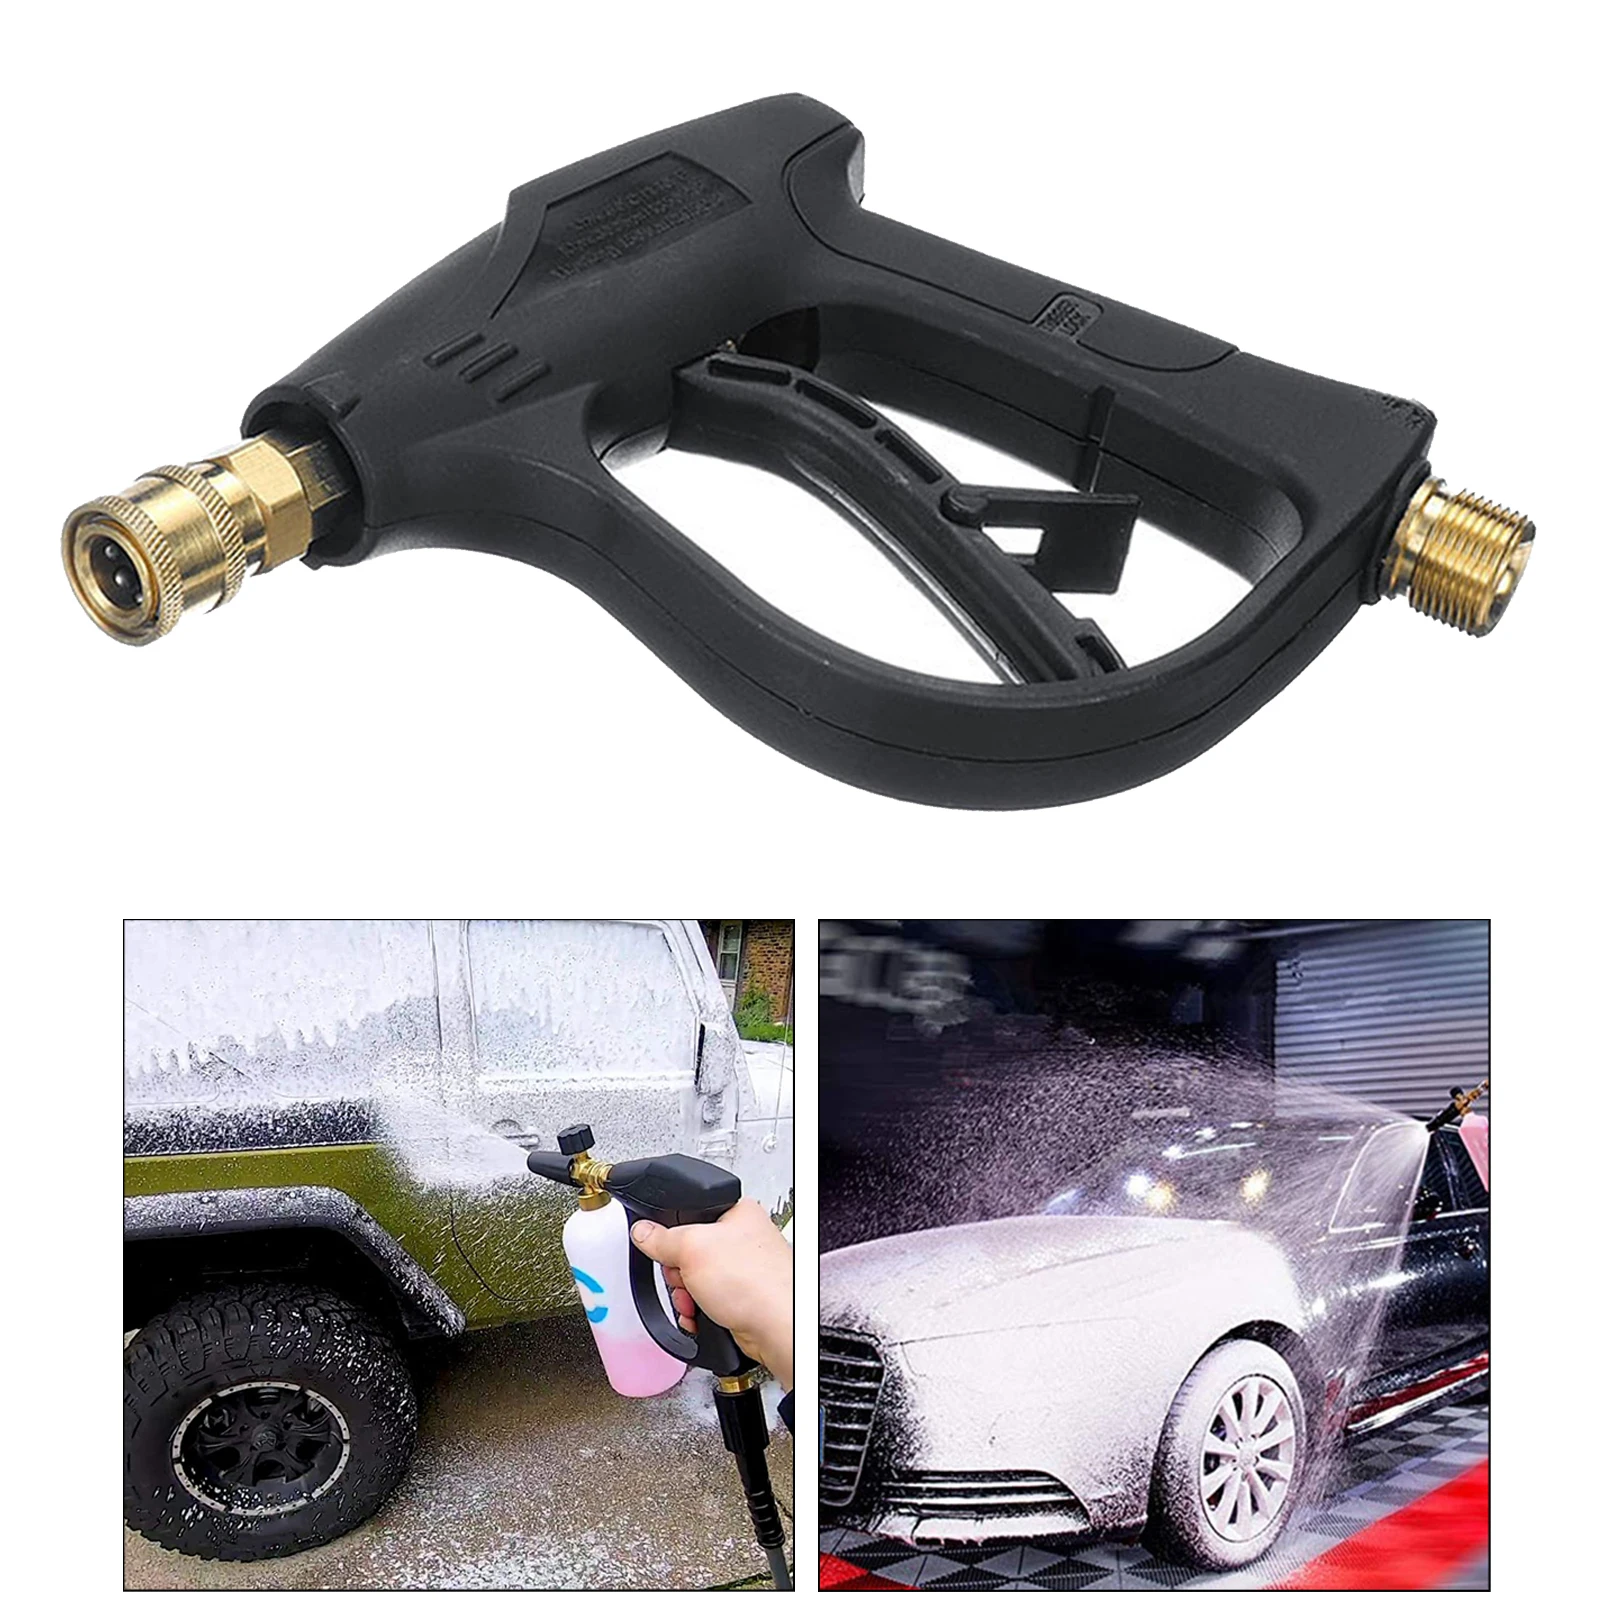 High Pressure Washer Gun 5000 PSI, Replacement for Hot and Cold Water, Pressure Washer Swivel Fitting, 5 Nozzle Tips